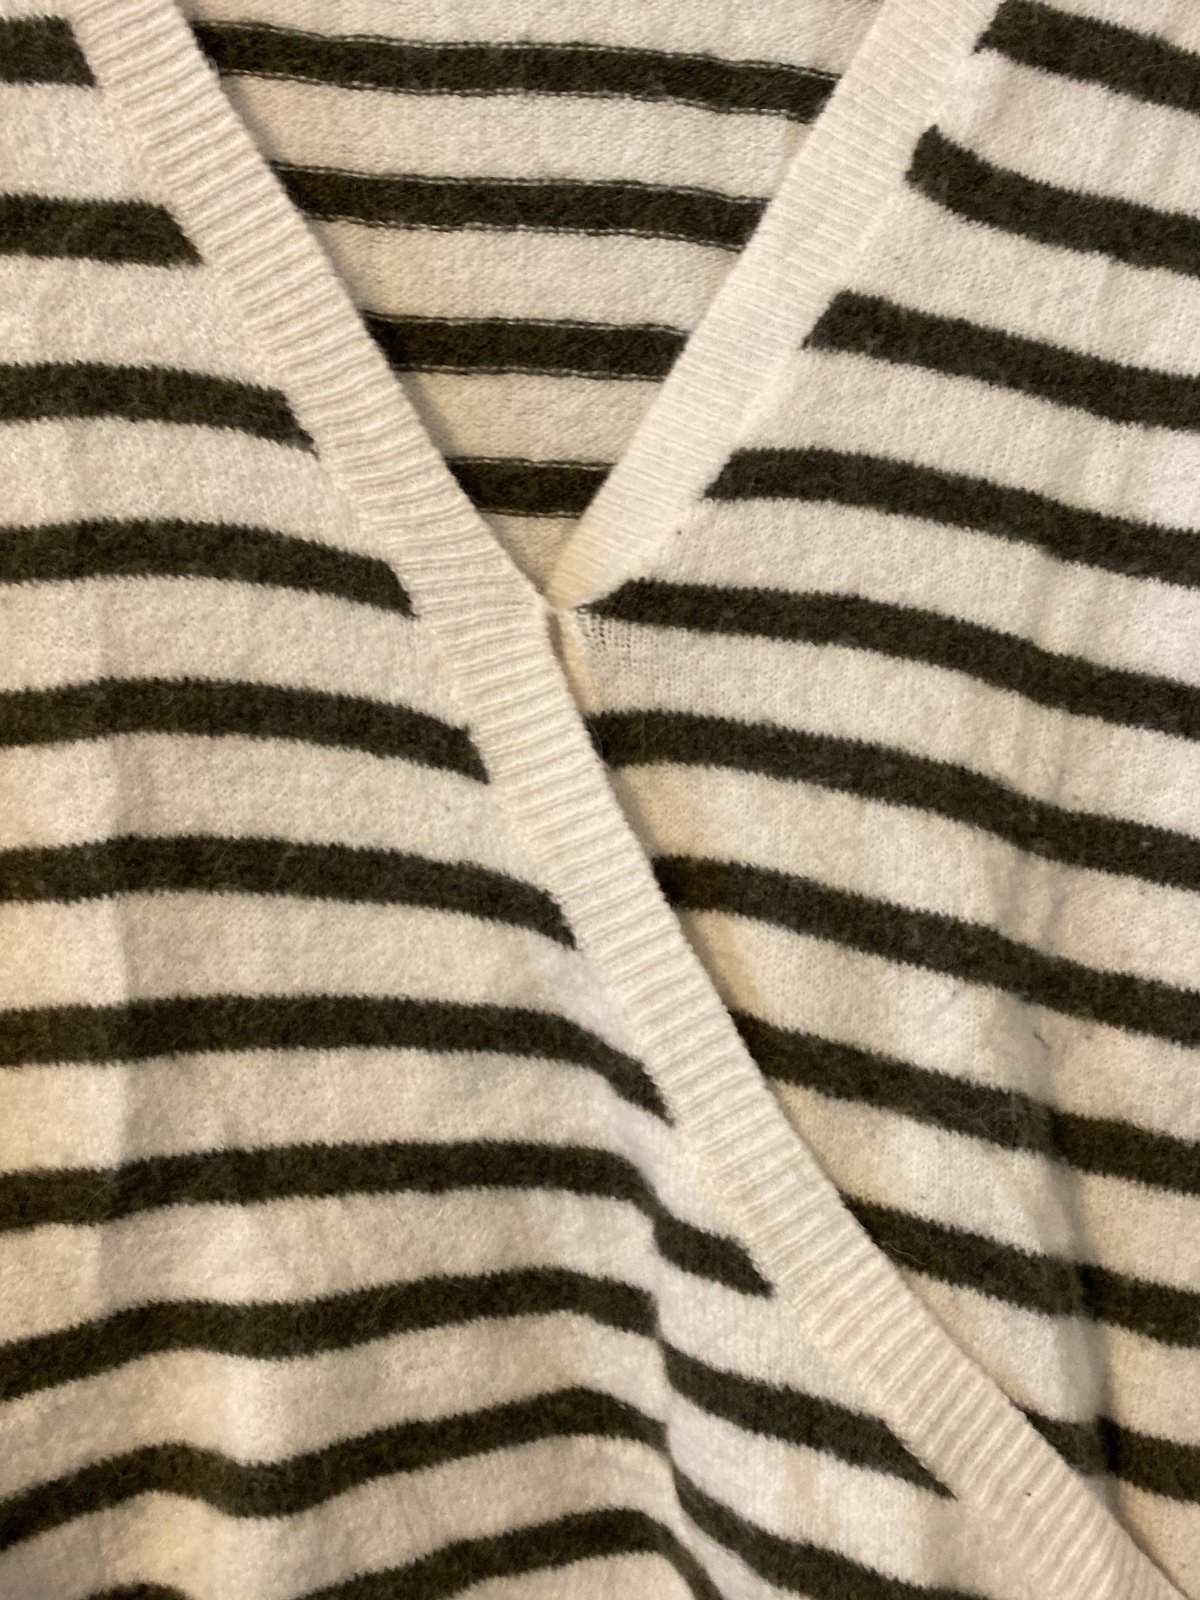 Buy Madewell green and cream wrap Sweater mtcaHUGyn Store Online